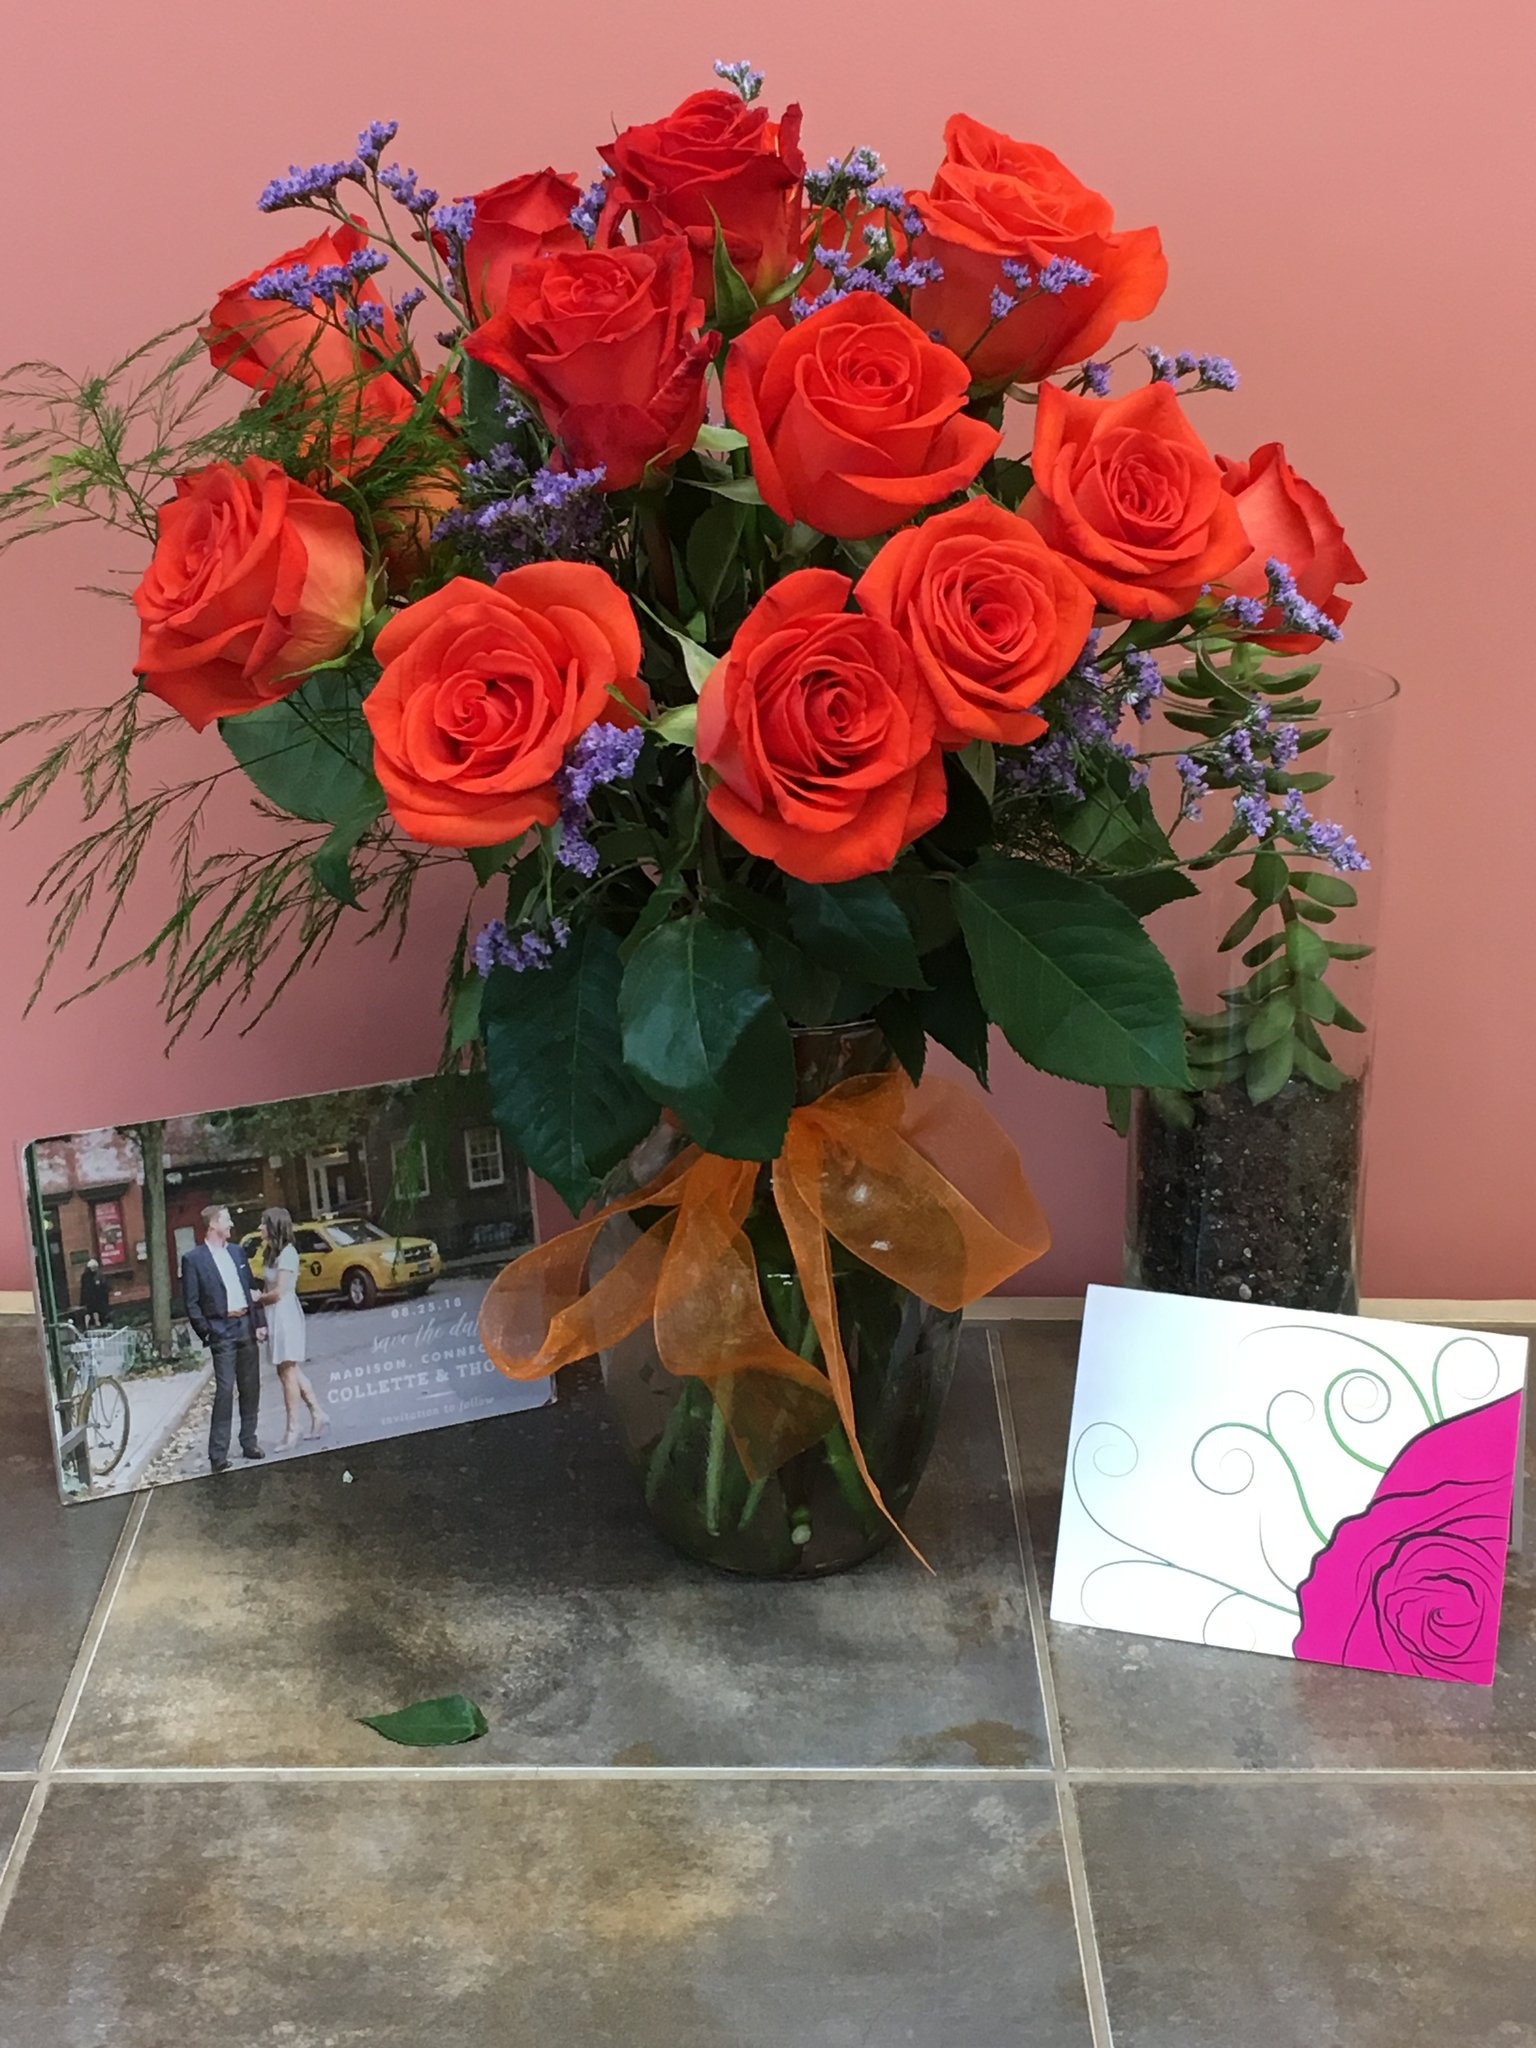 18 Perfect Vase with Red Roses 2024 free download vase with red roses of cool red roses picturesque bouquet www picturesboss com with regard to classic orange rose bouquet roses for autism vase orange roses bouquet picturesque flowe jpg 153